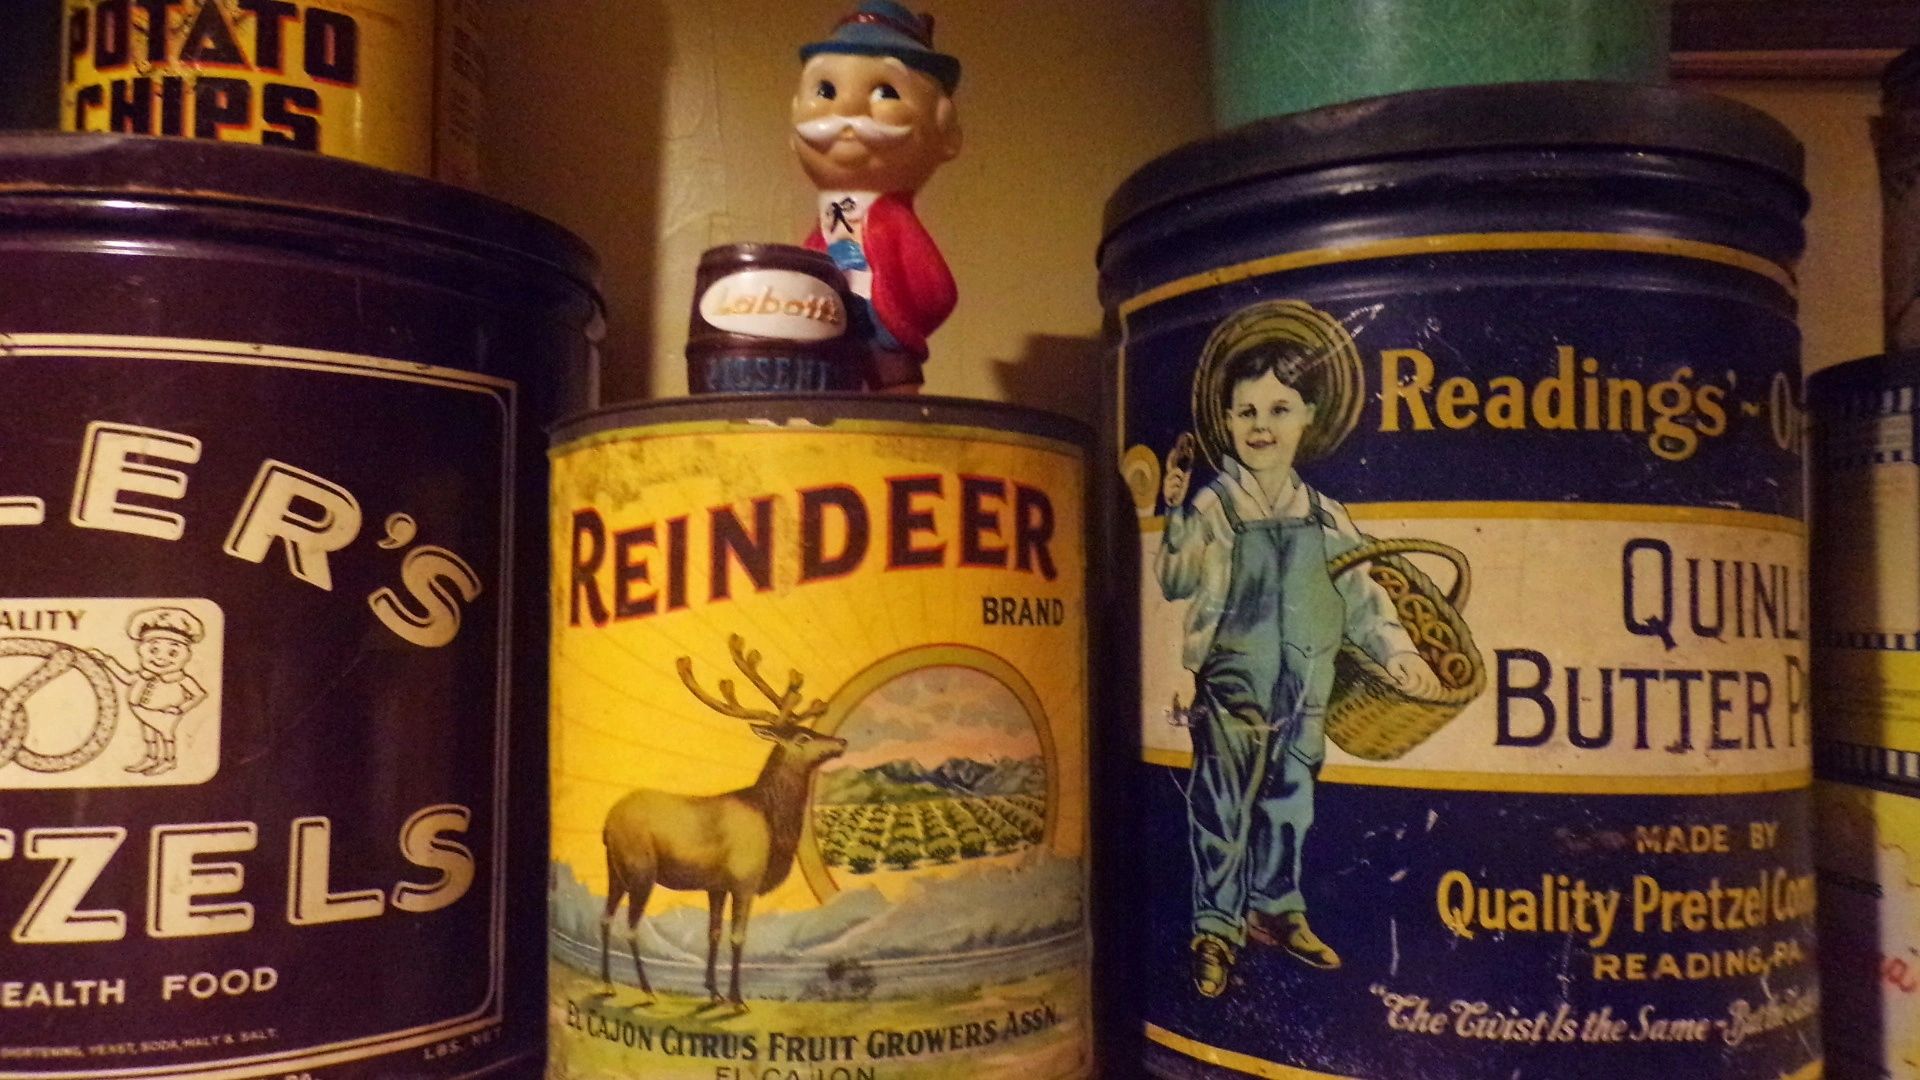 We buy collections of old snack tins, candy and snack cans. Email jefflebo@aol.com to sell yours.